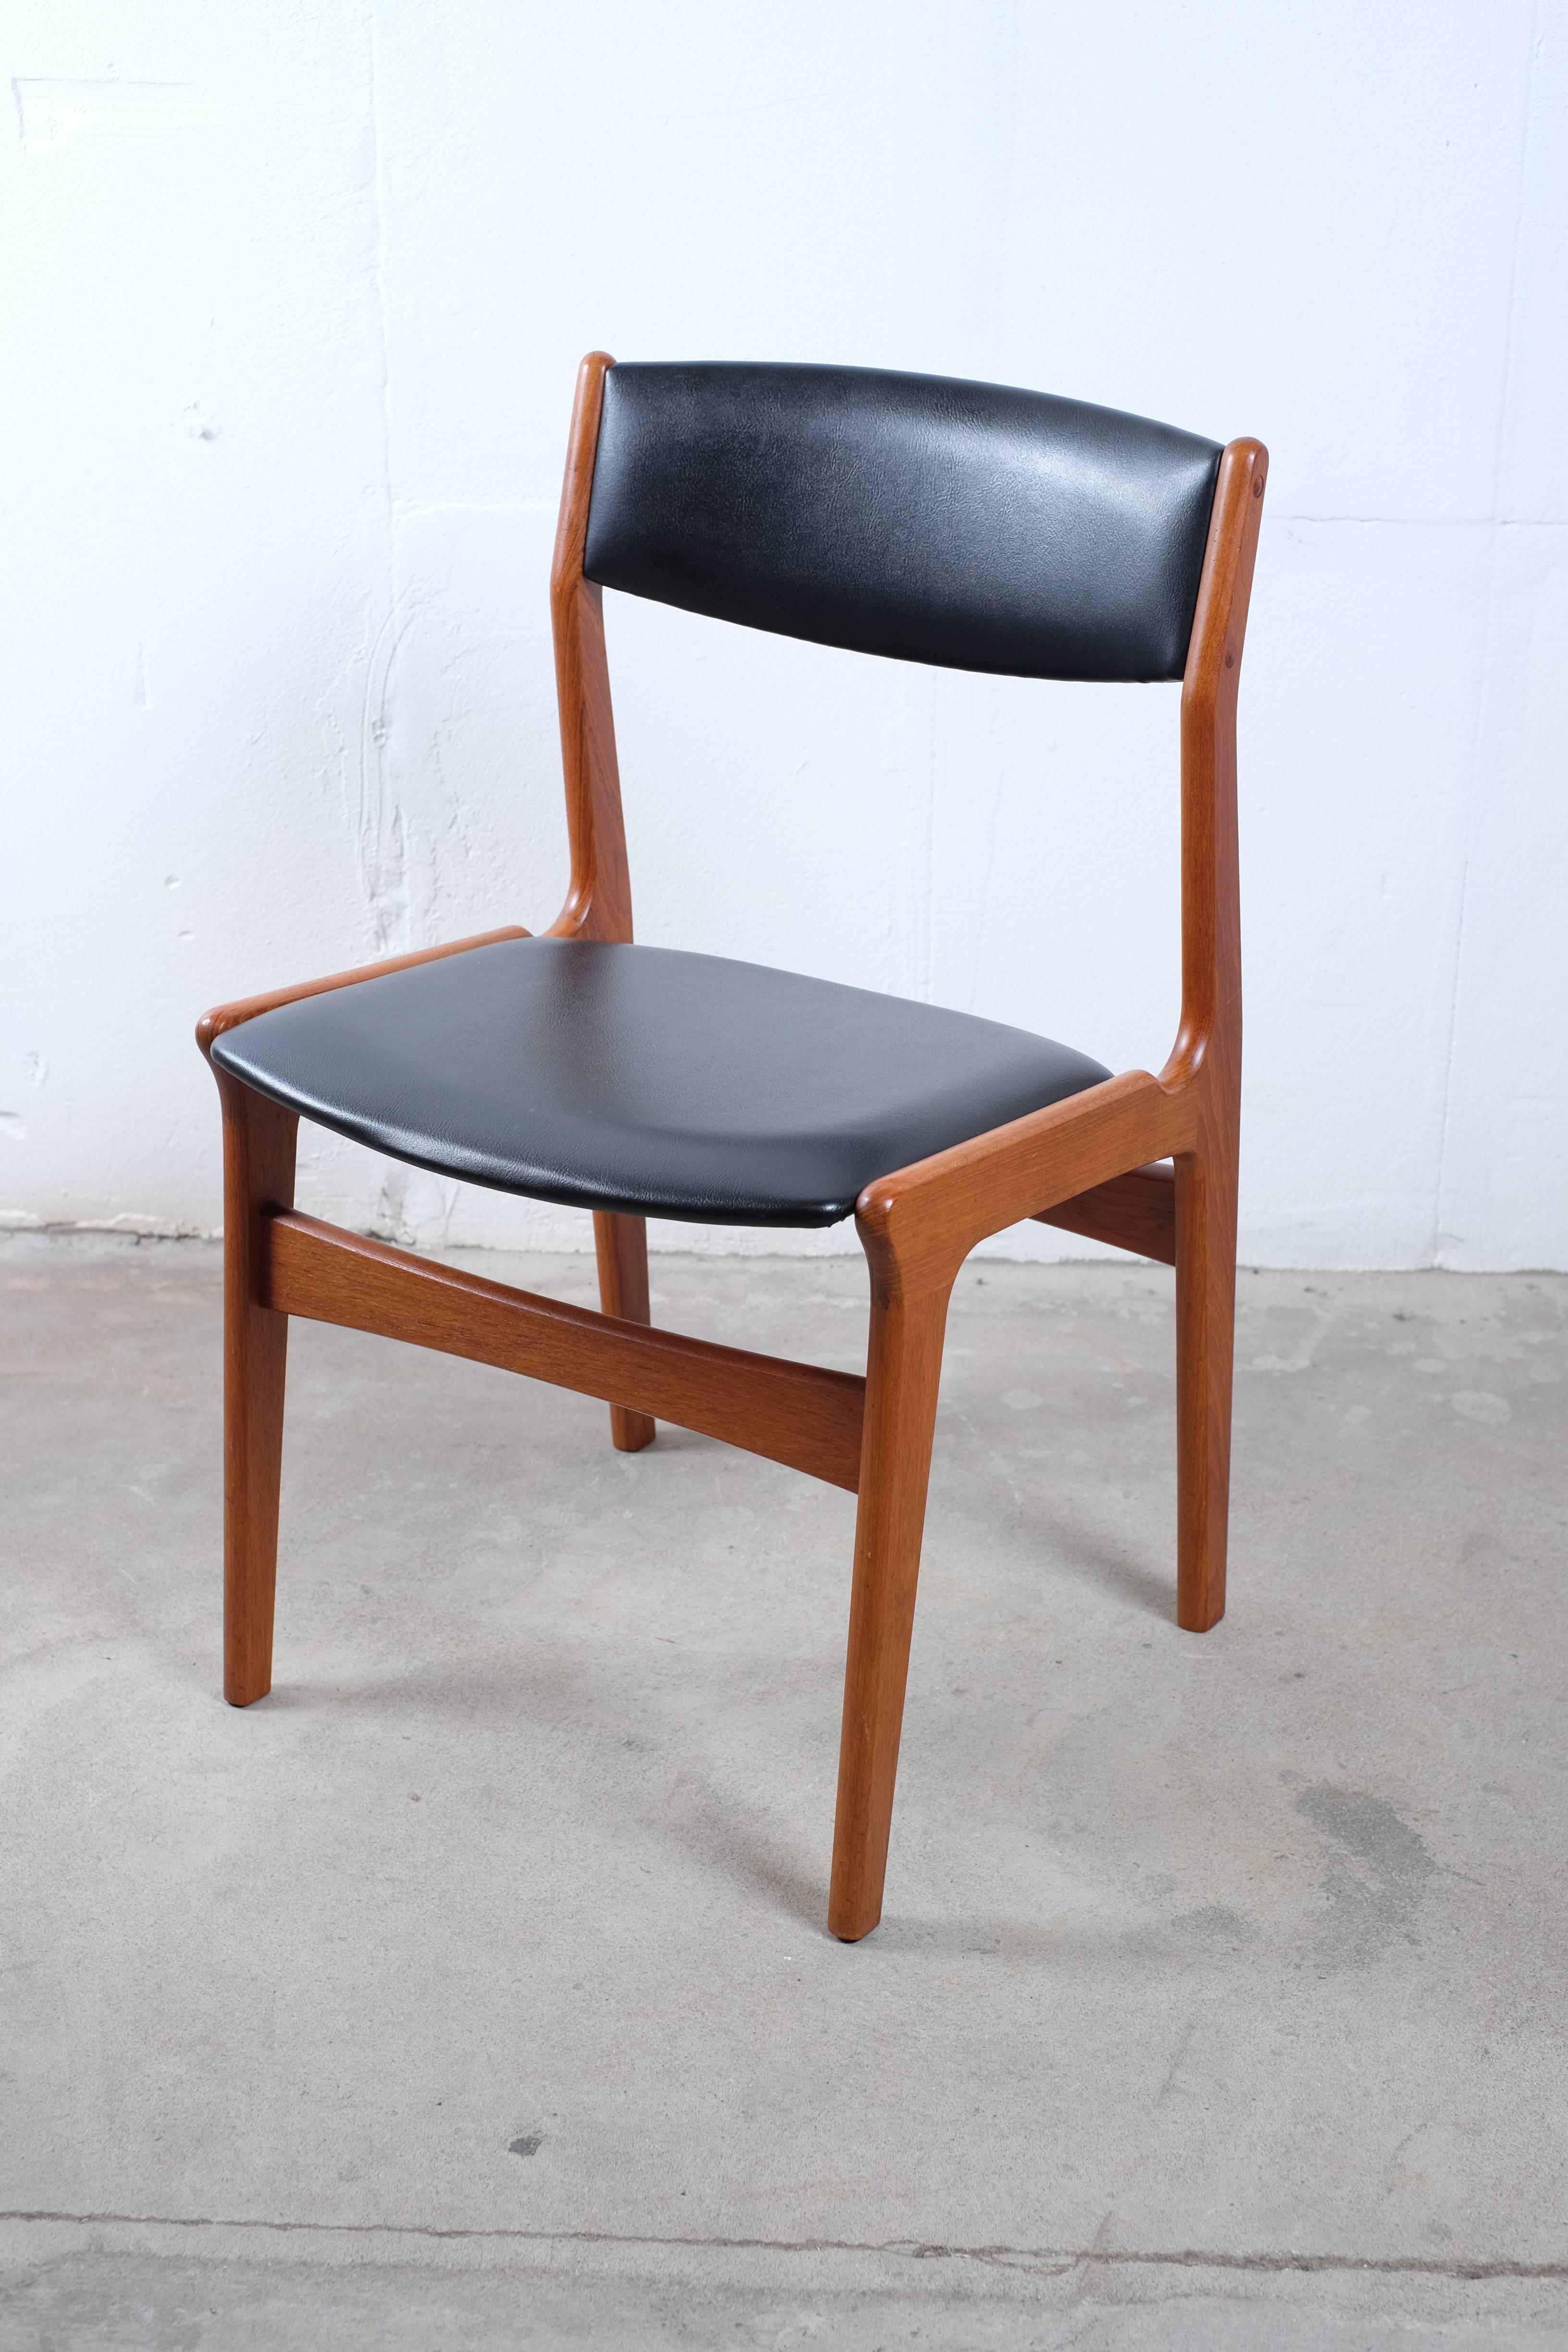 Set of Six Dining Chairs in Teak by Nova, Danish Design In Good Condition For Sale In Middelfart, Fyn